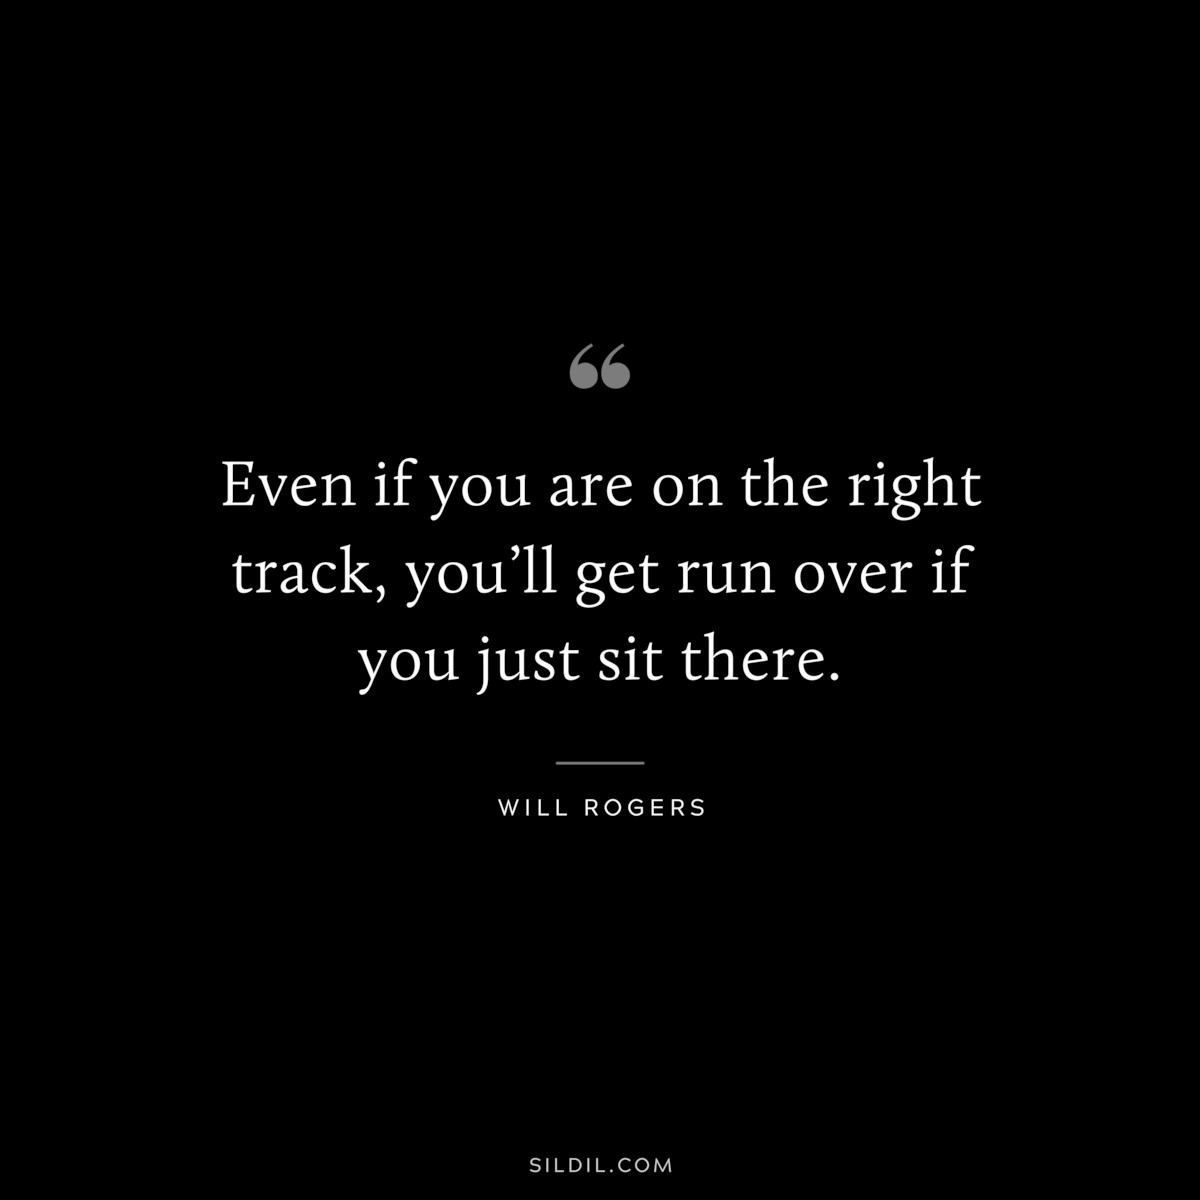 Even if you are on the right track, you’ll get run over if you just sit there. ― Will Rogers